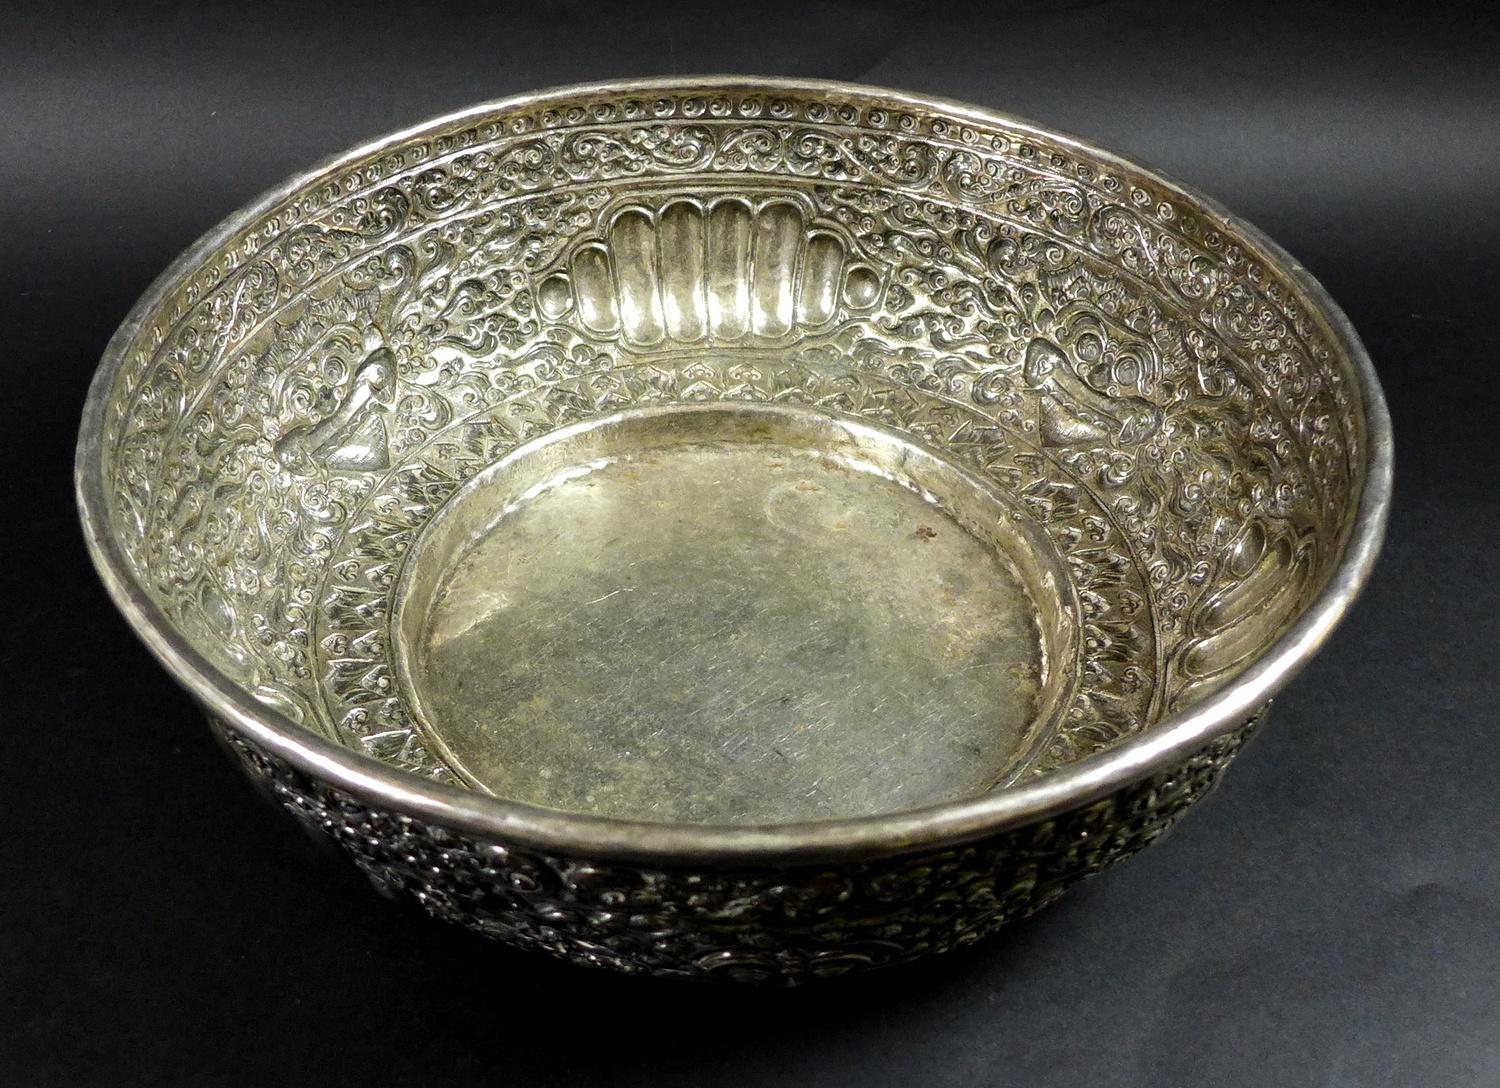 A late 19th century Thai silver large bowl, repousse decorated in relief with three face masks and - Image 2 of 10